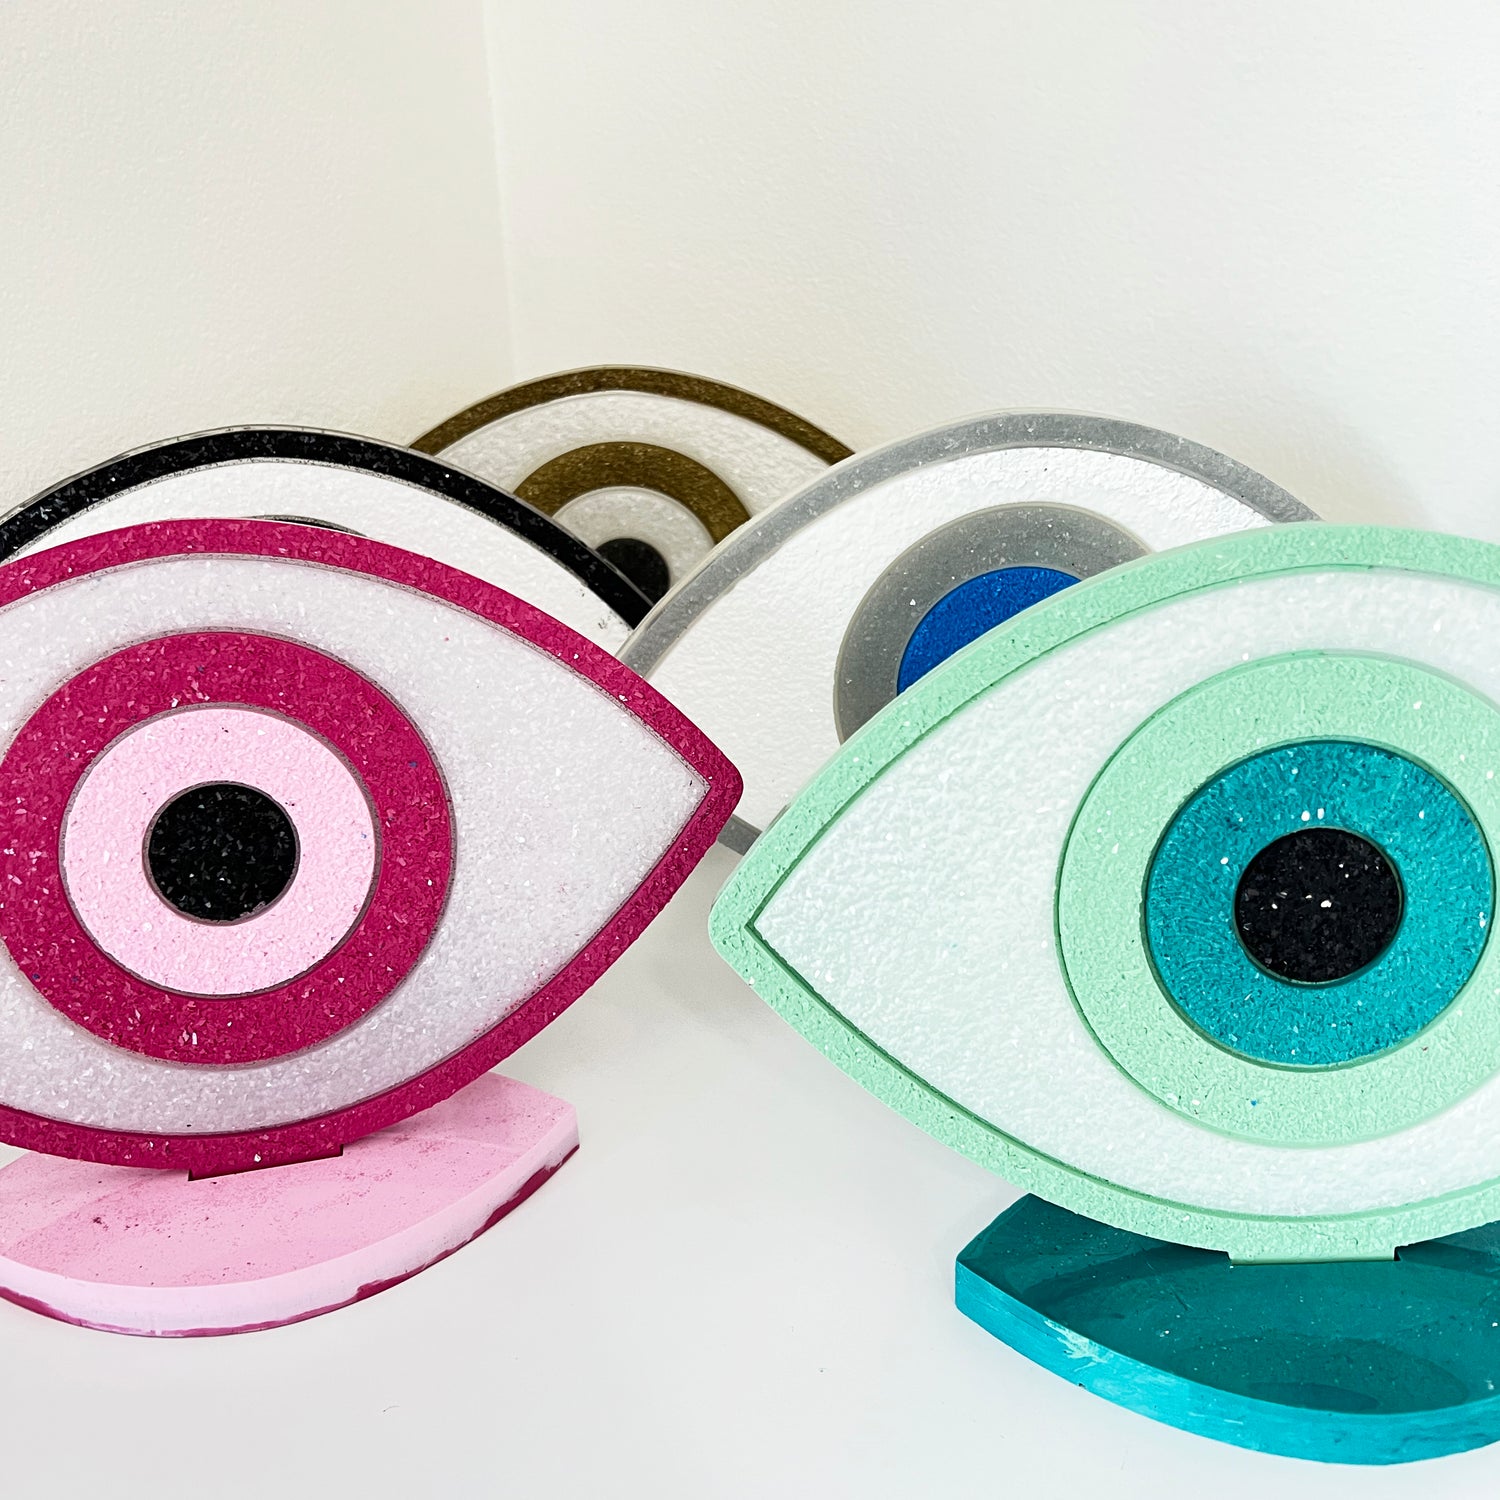 LARGE EVIL EYE WITH STAND